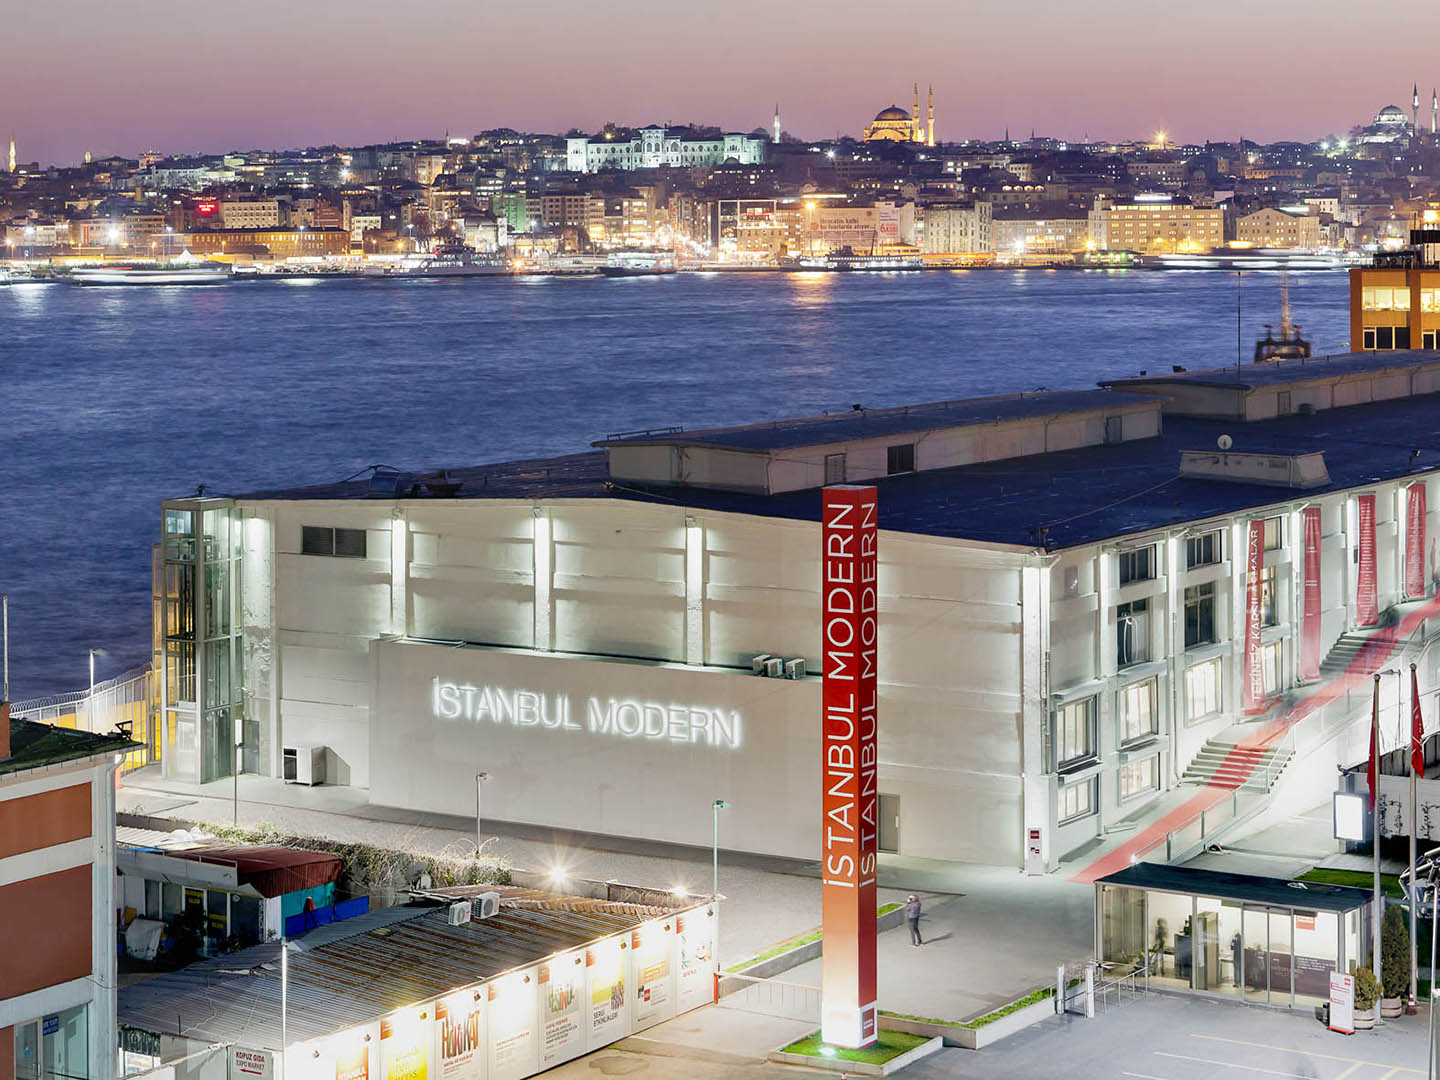 İstanbul Museums and Modern Arts